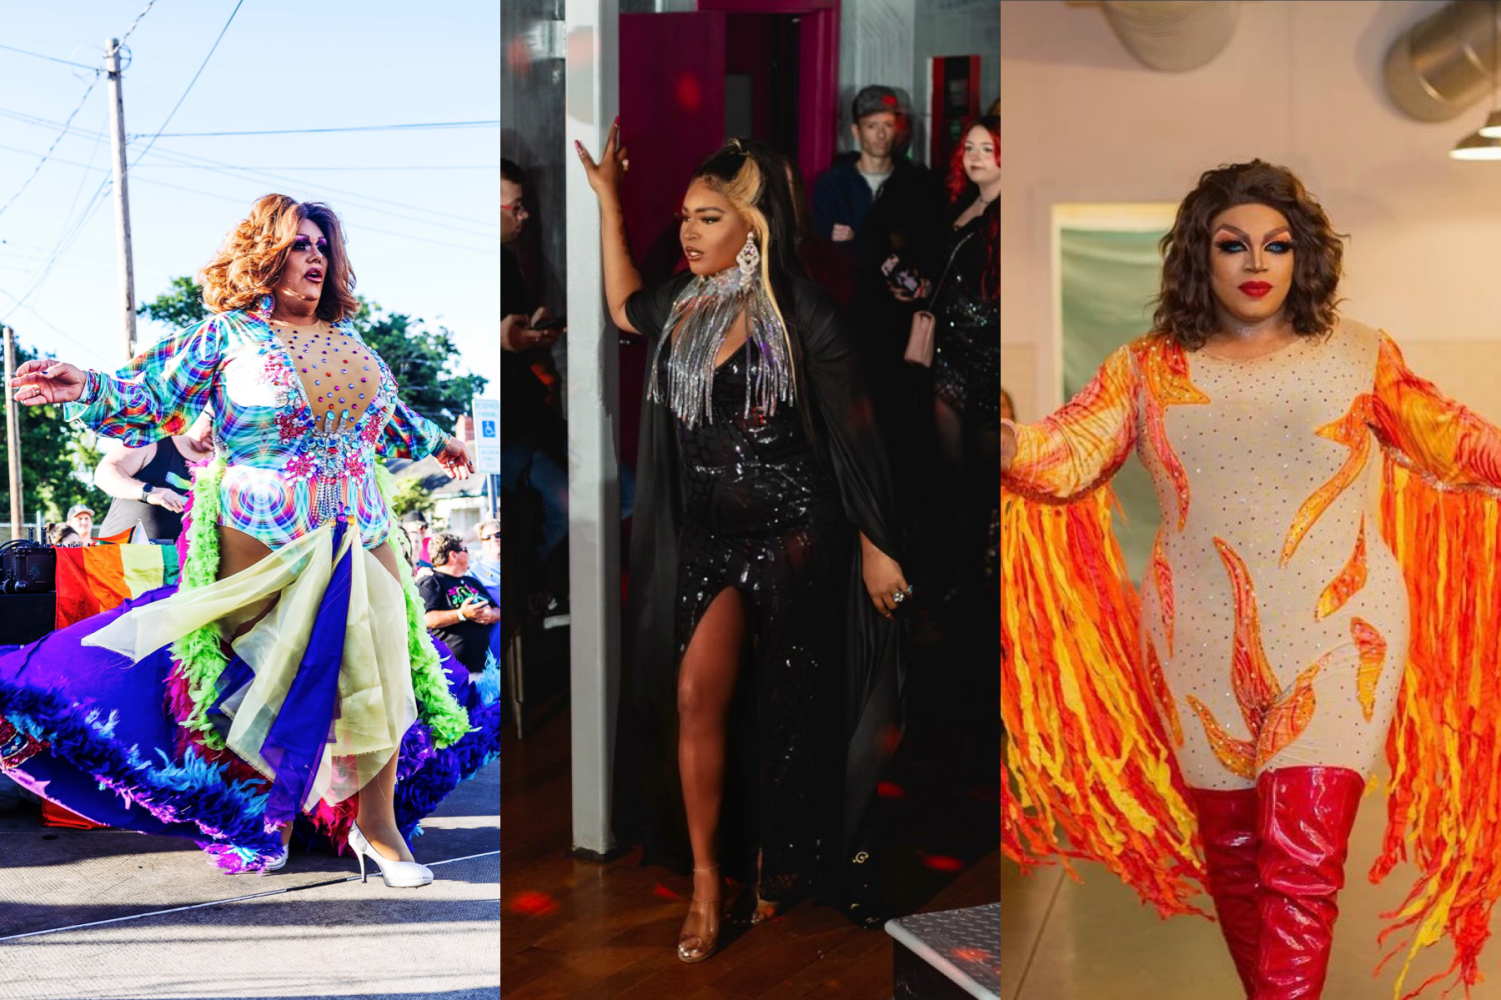 As drag comes under attack across the country, local queens speak